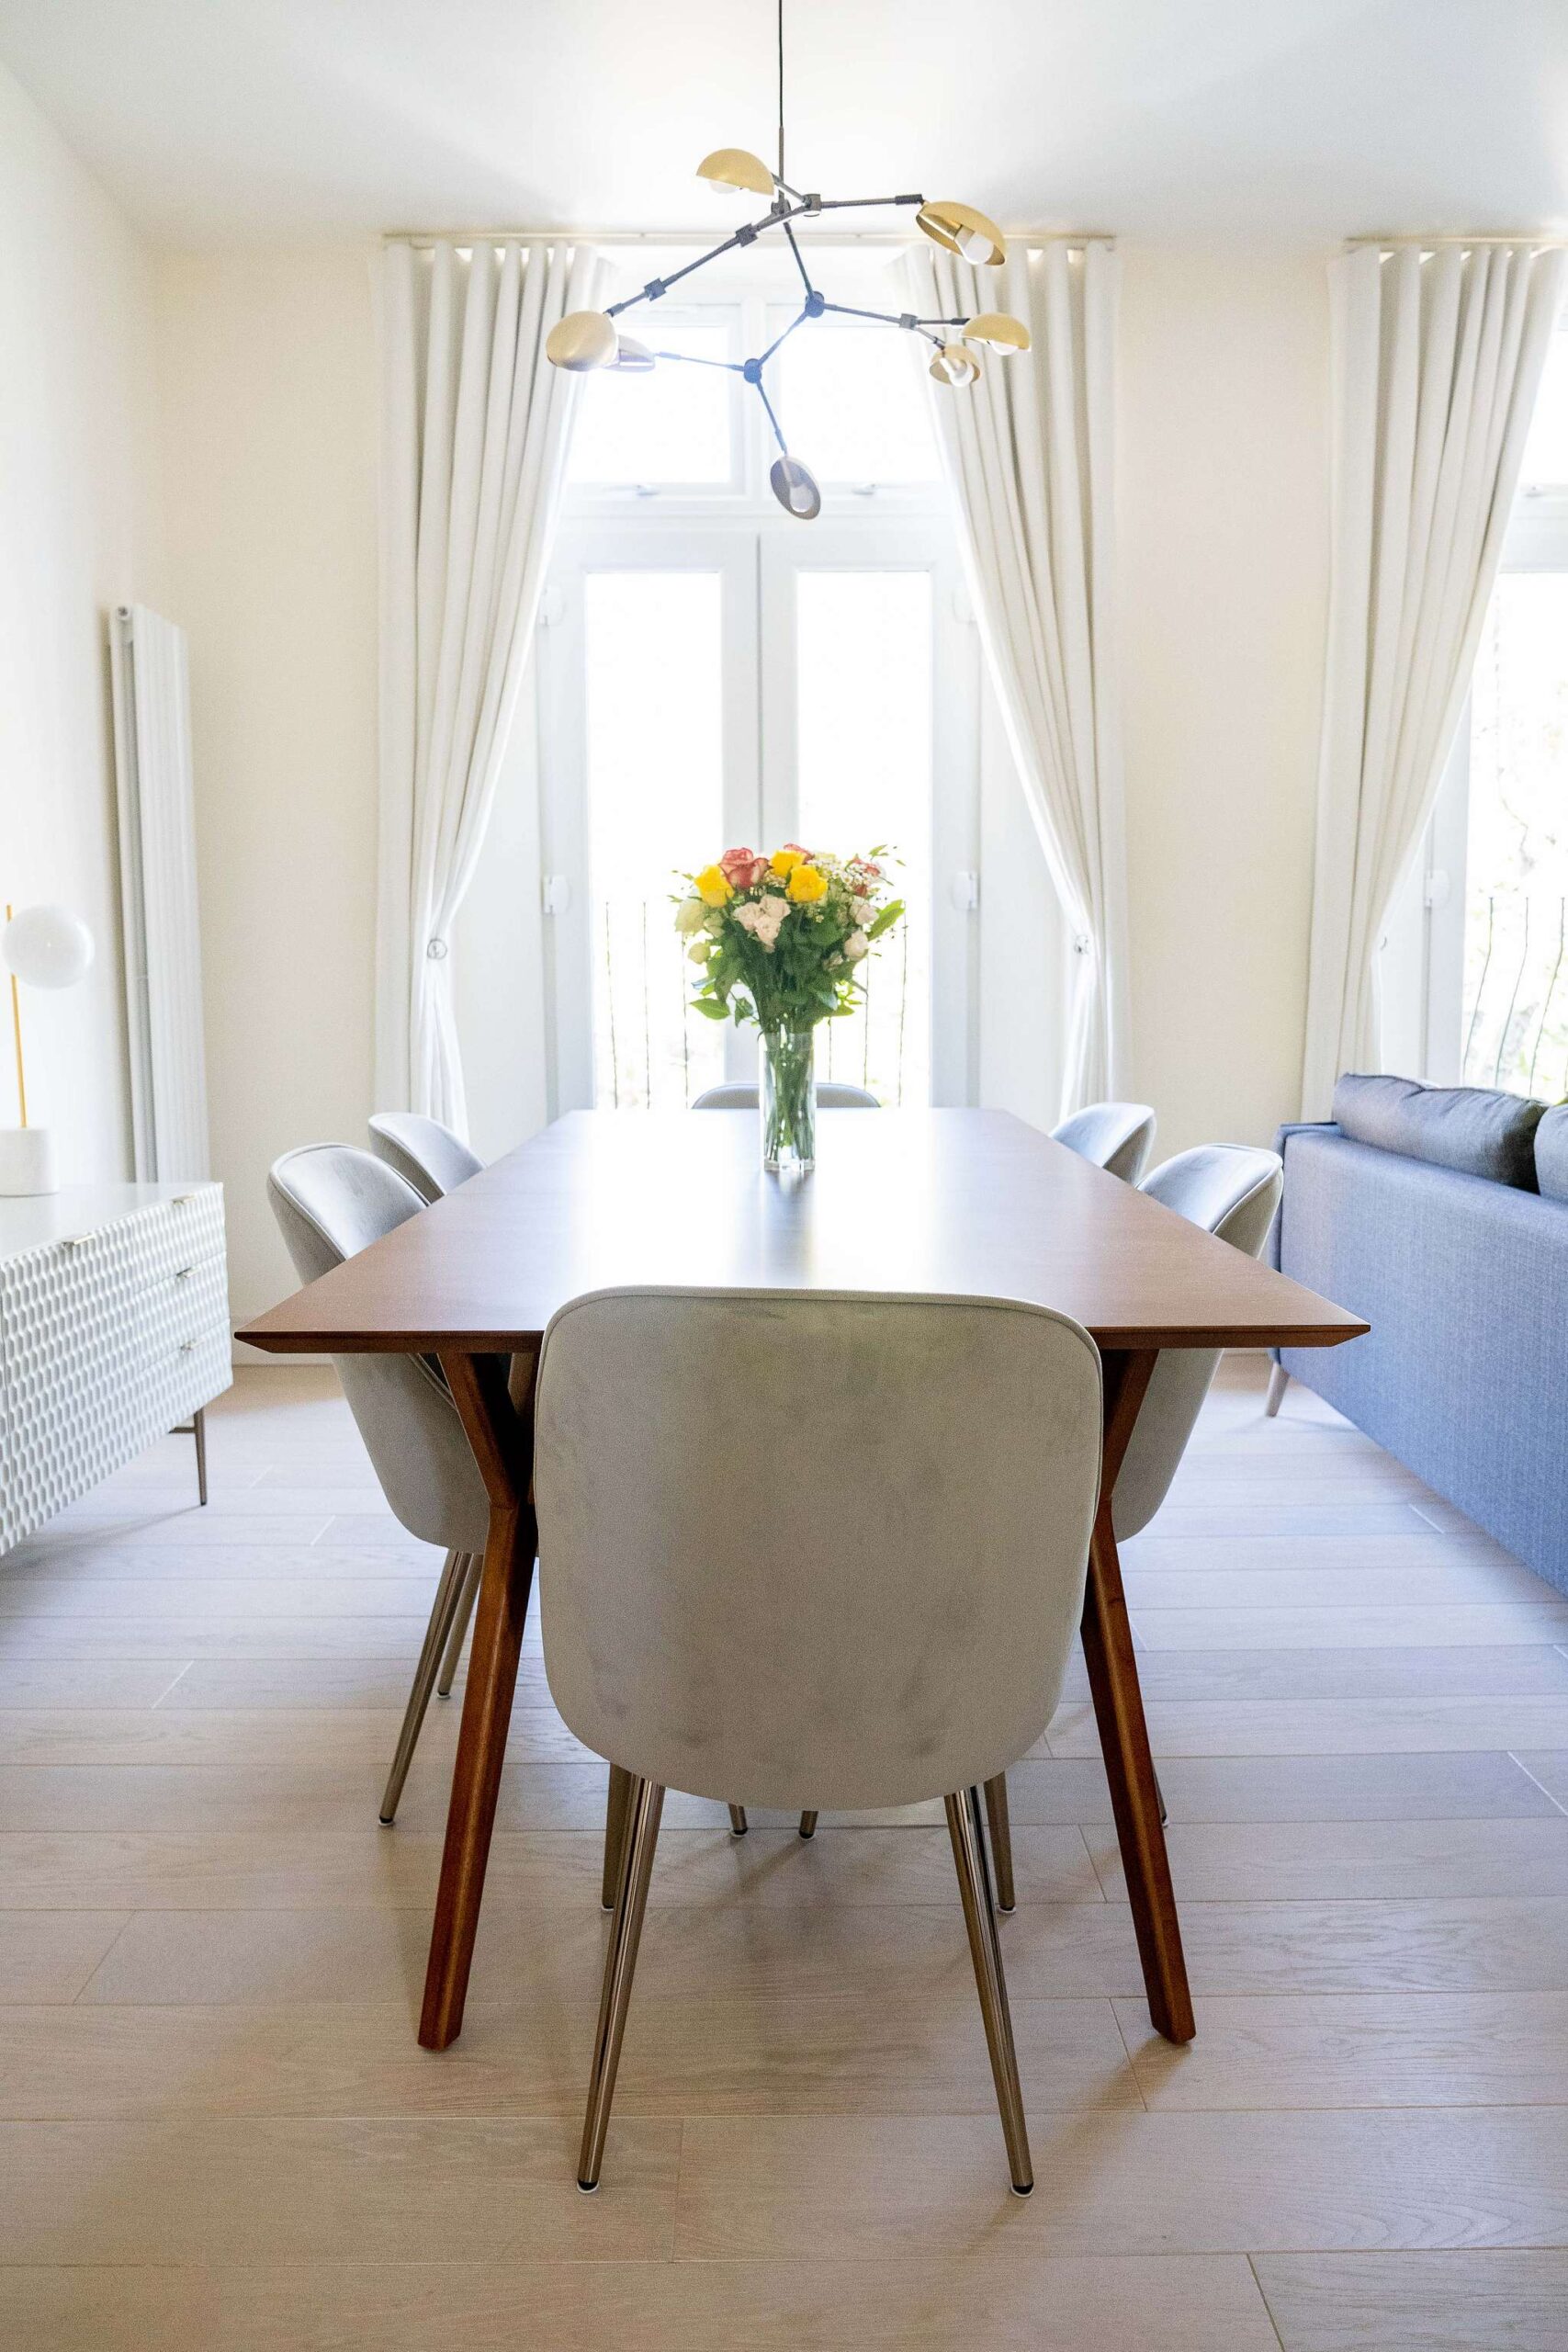 dining table with chairs, flower and light fitting